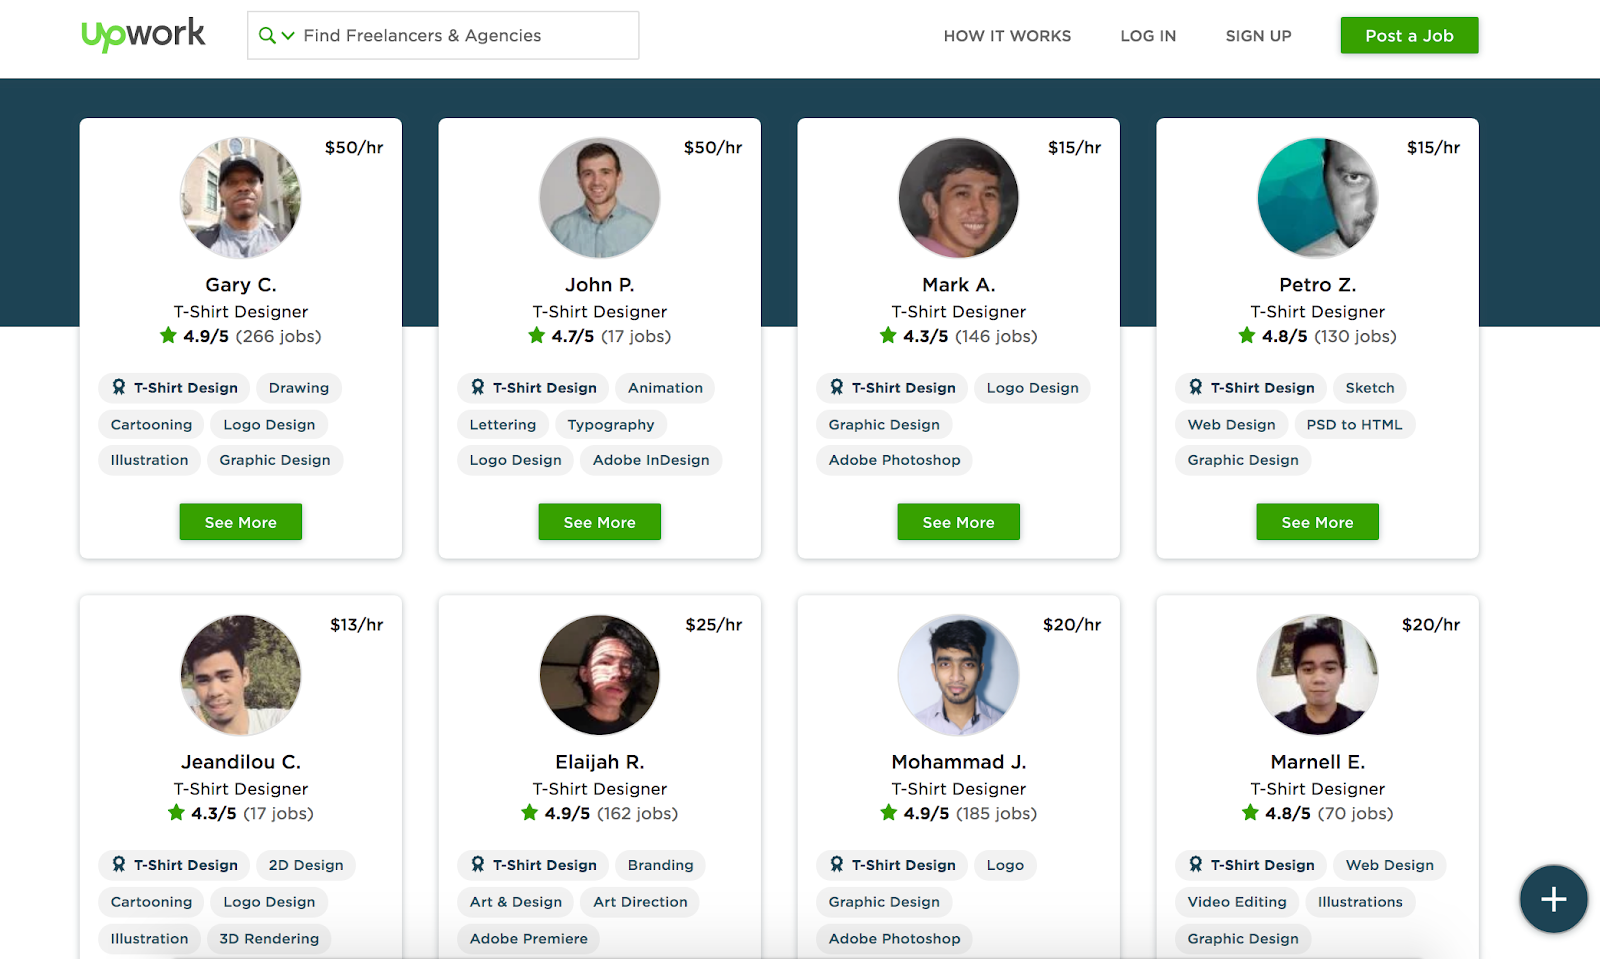 Eight digital cards showing headshots, skills, and reviews of freelance t-shirt designers on Upwork.